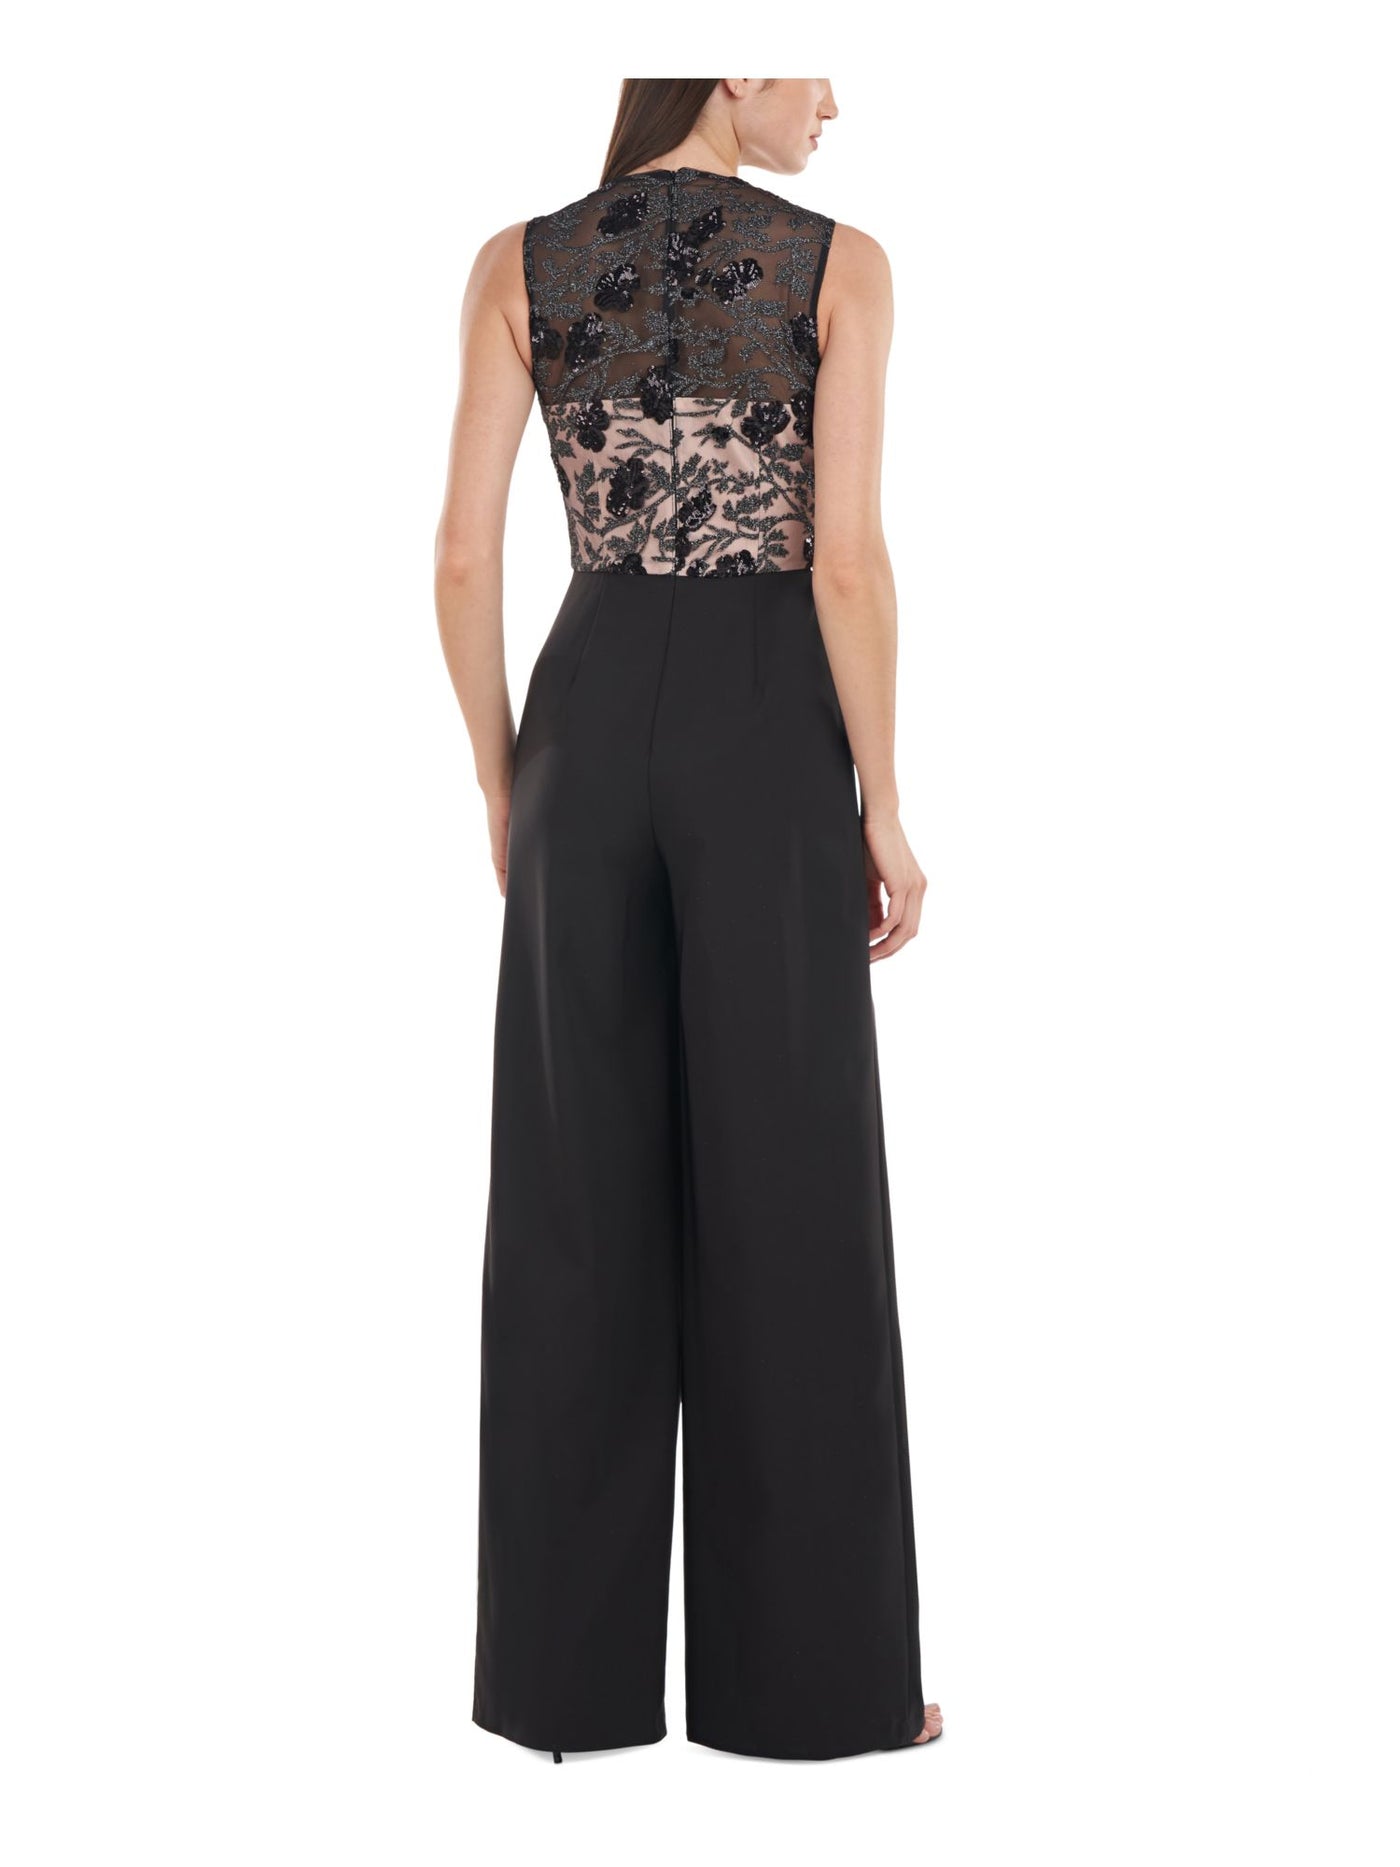 JS COLLECTIONS Womens Black Zippered Embroidered Sheer Lined Sequined Pleated Floral Sleeveless Round Neck Evening Wide Leg Jumpsuit 6